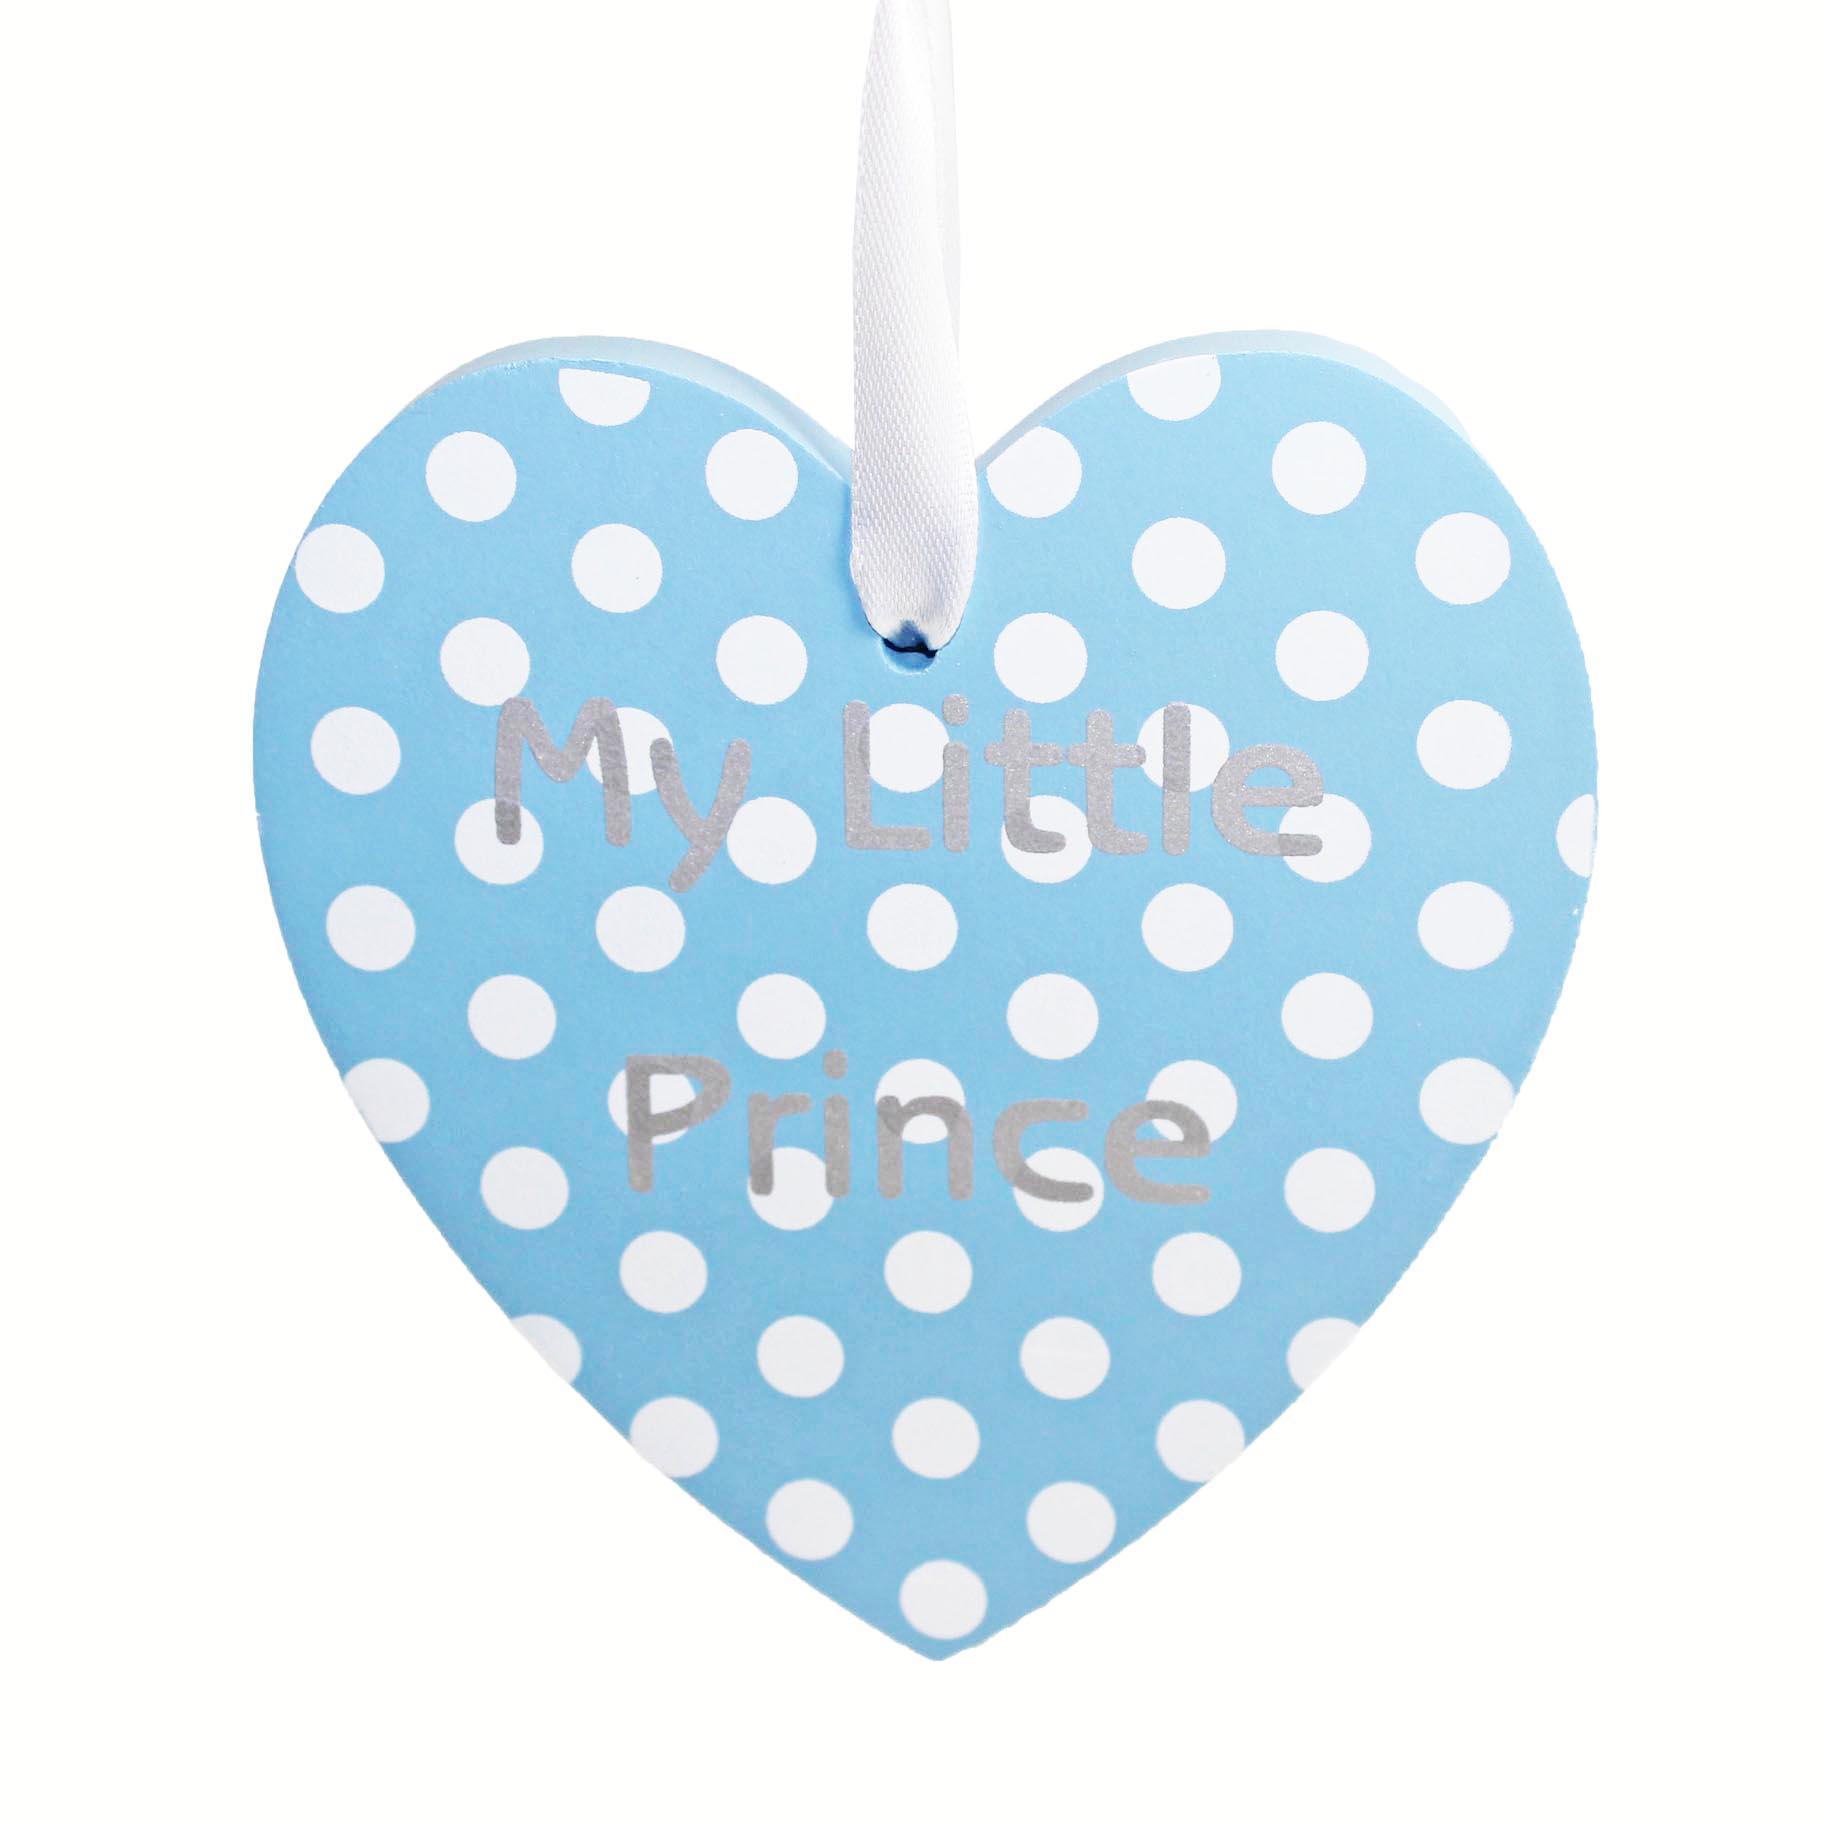 My little prince - blue with white polka dot hanging heart plaque